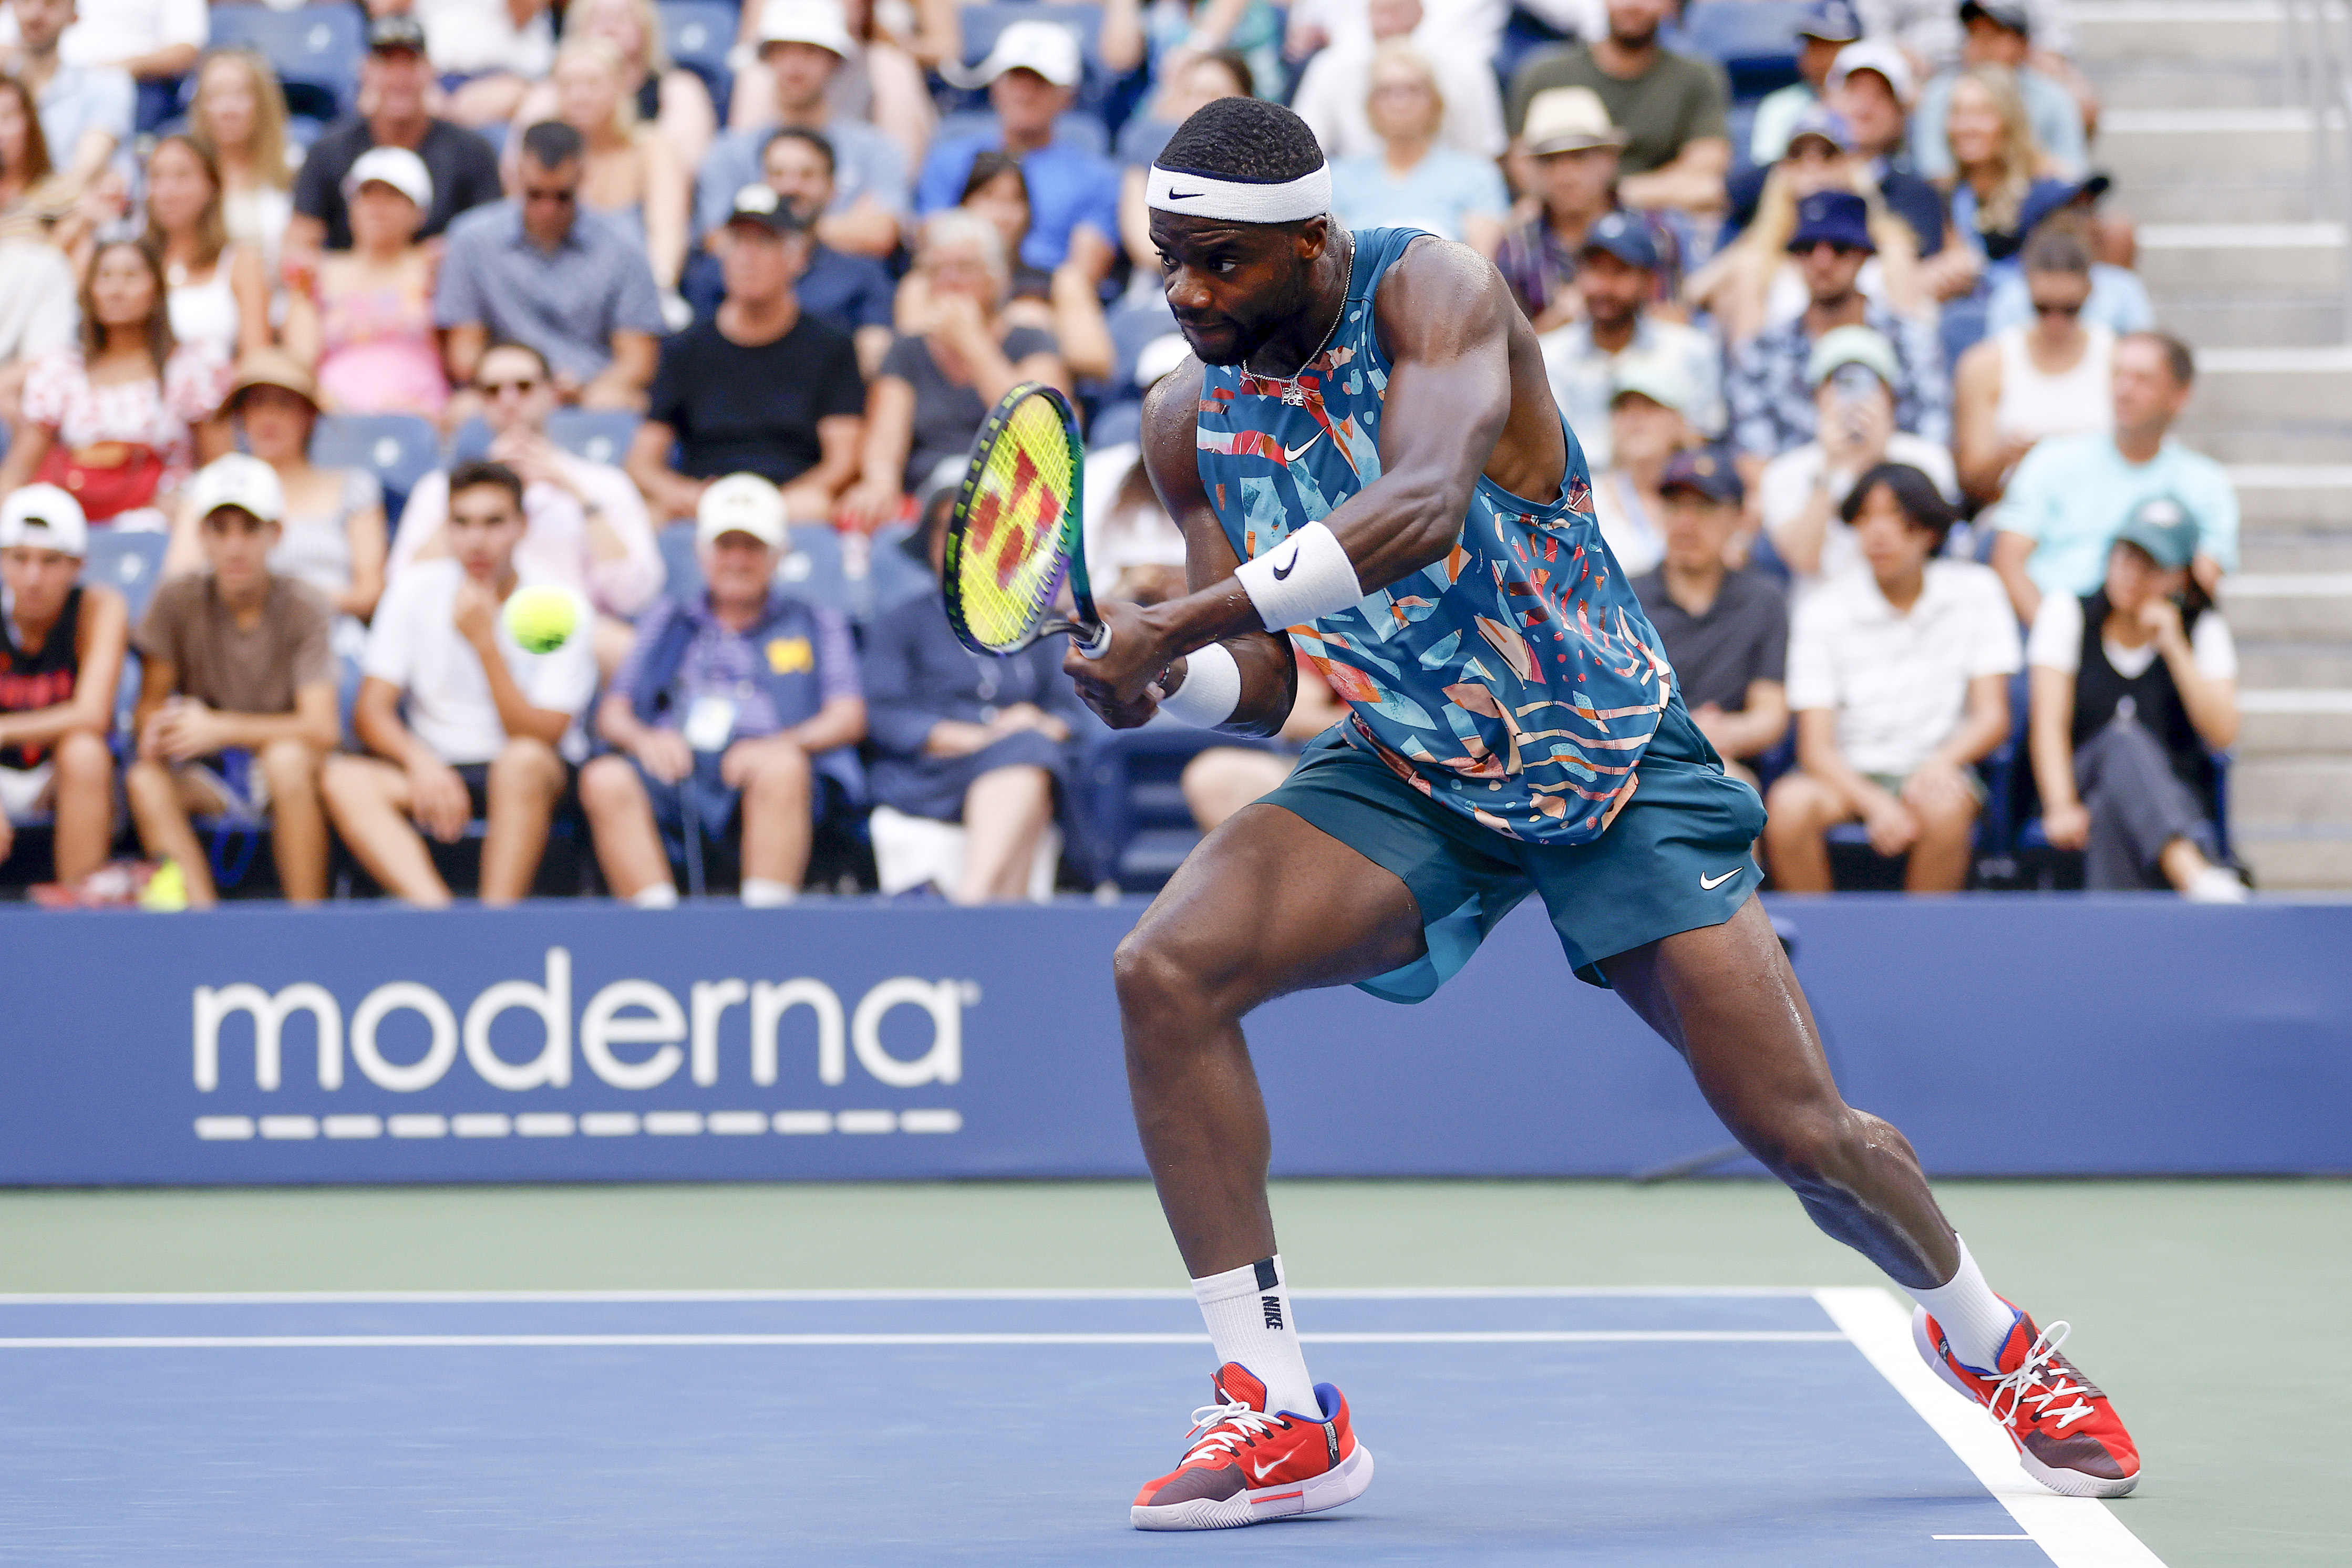 Frances Tiafoe of the United States returns a shot against Rinky Hijikata of Australia during their Men’s Singles Fourth Round match on Day Seven of the 2023 US Open at the USTA Billie Jean King National Tennis Center on September 03, 2023 in the Flushing neighborhood of the Queens borough of New York City.